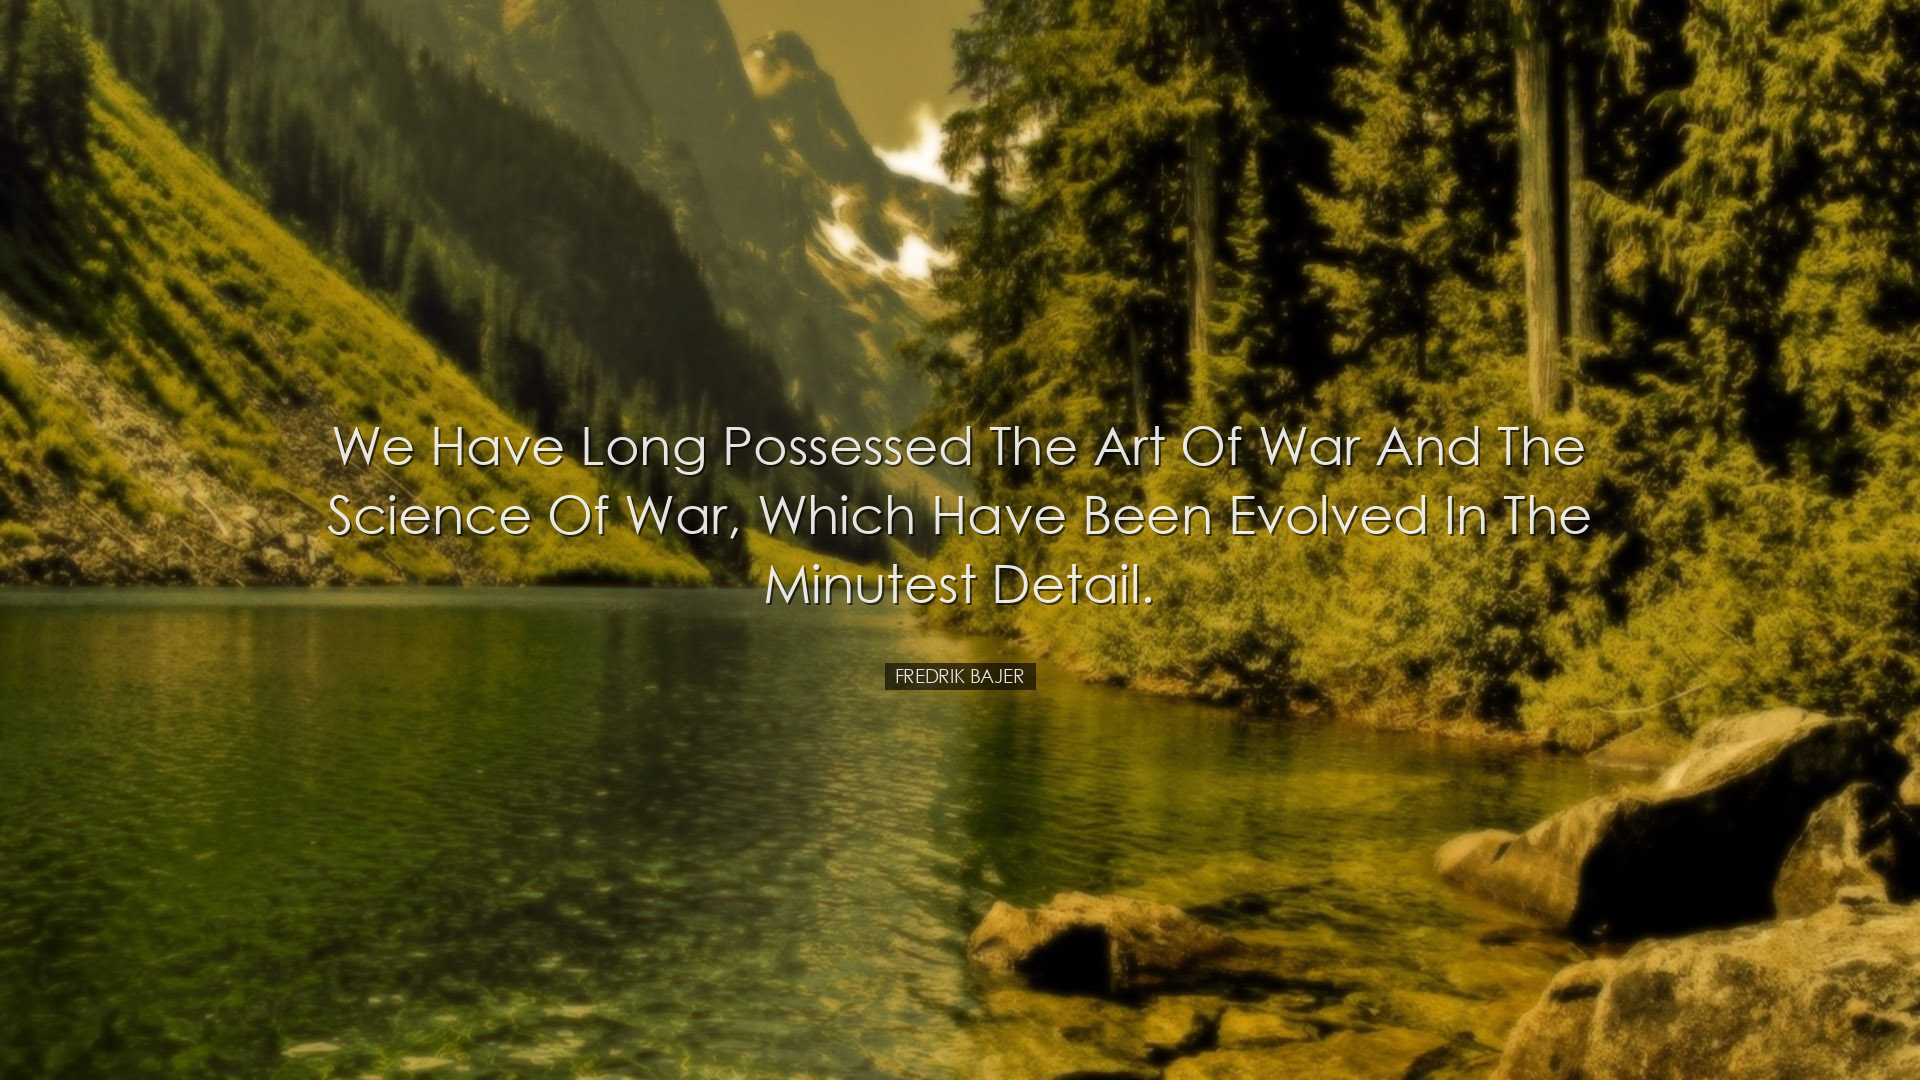 We have long possessed the art of war and the science of war, whic